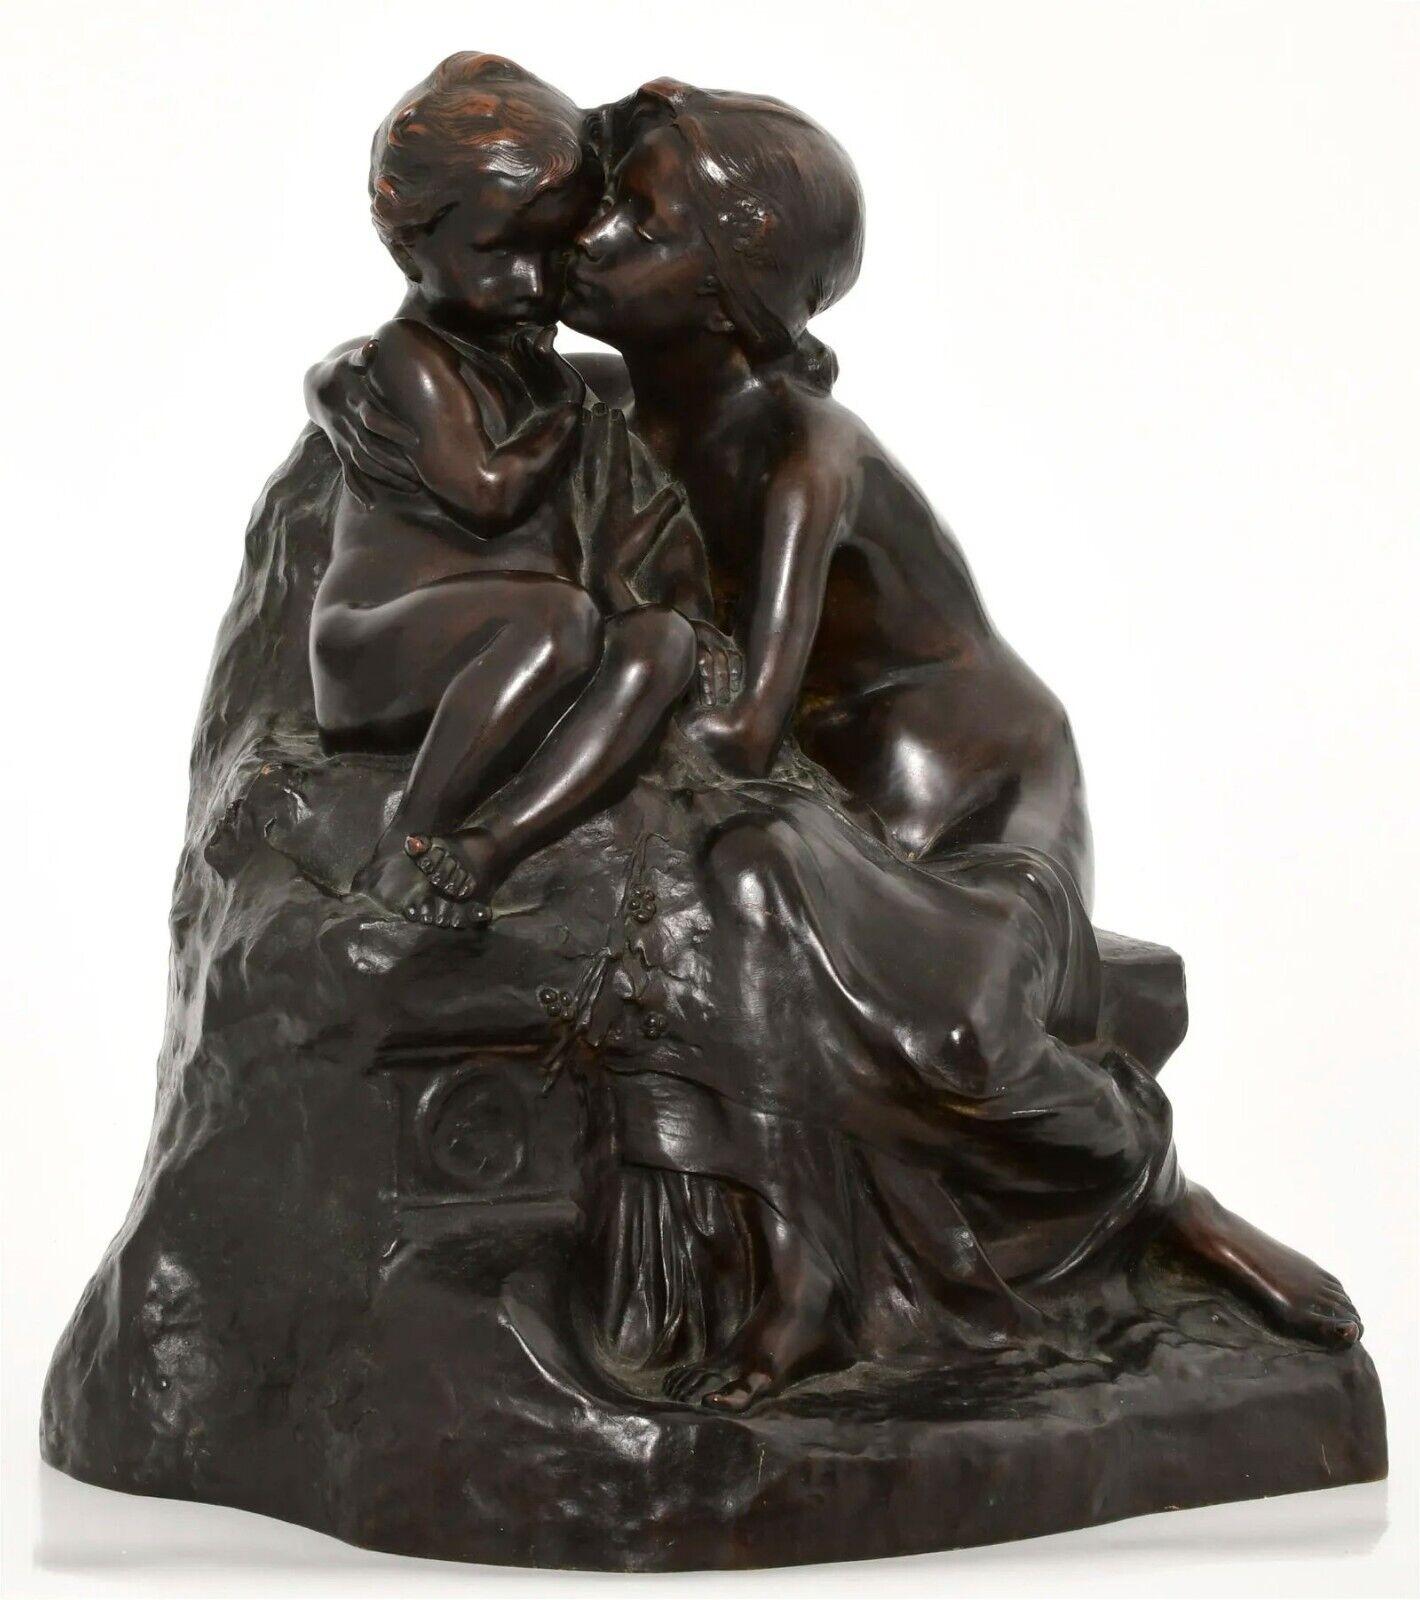 Antique patinated bronze sculpture entitled La Grand Soueur (Big Sister) after 
Henri Pernot (1859-1937), cast in the early 20th century by Thiebaut Freres, Paris.